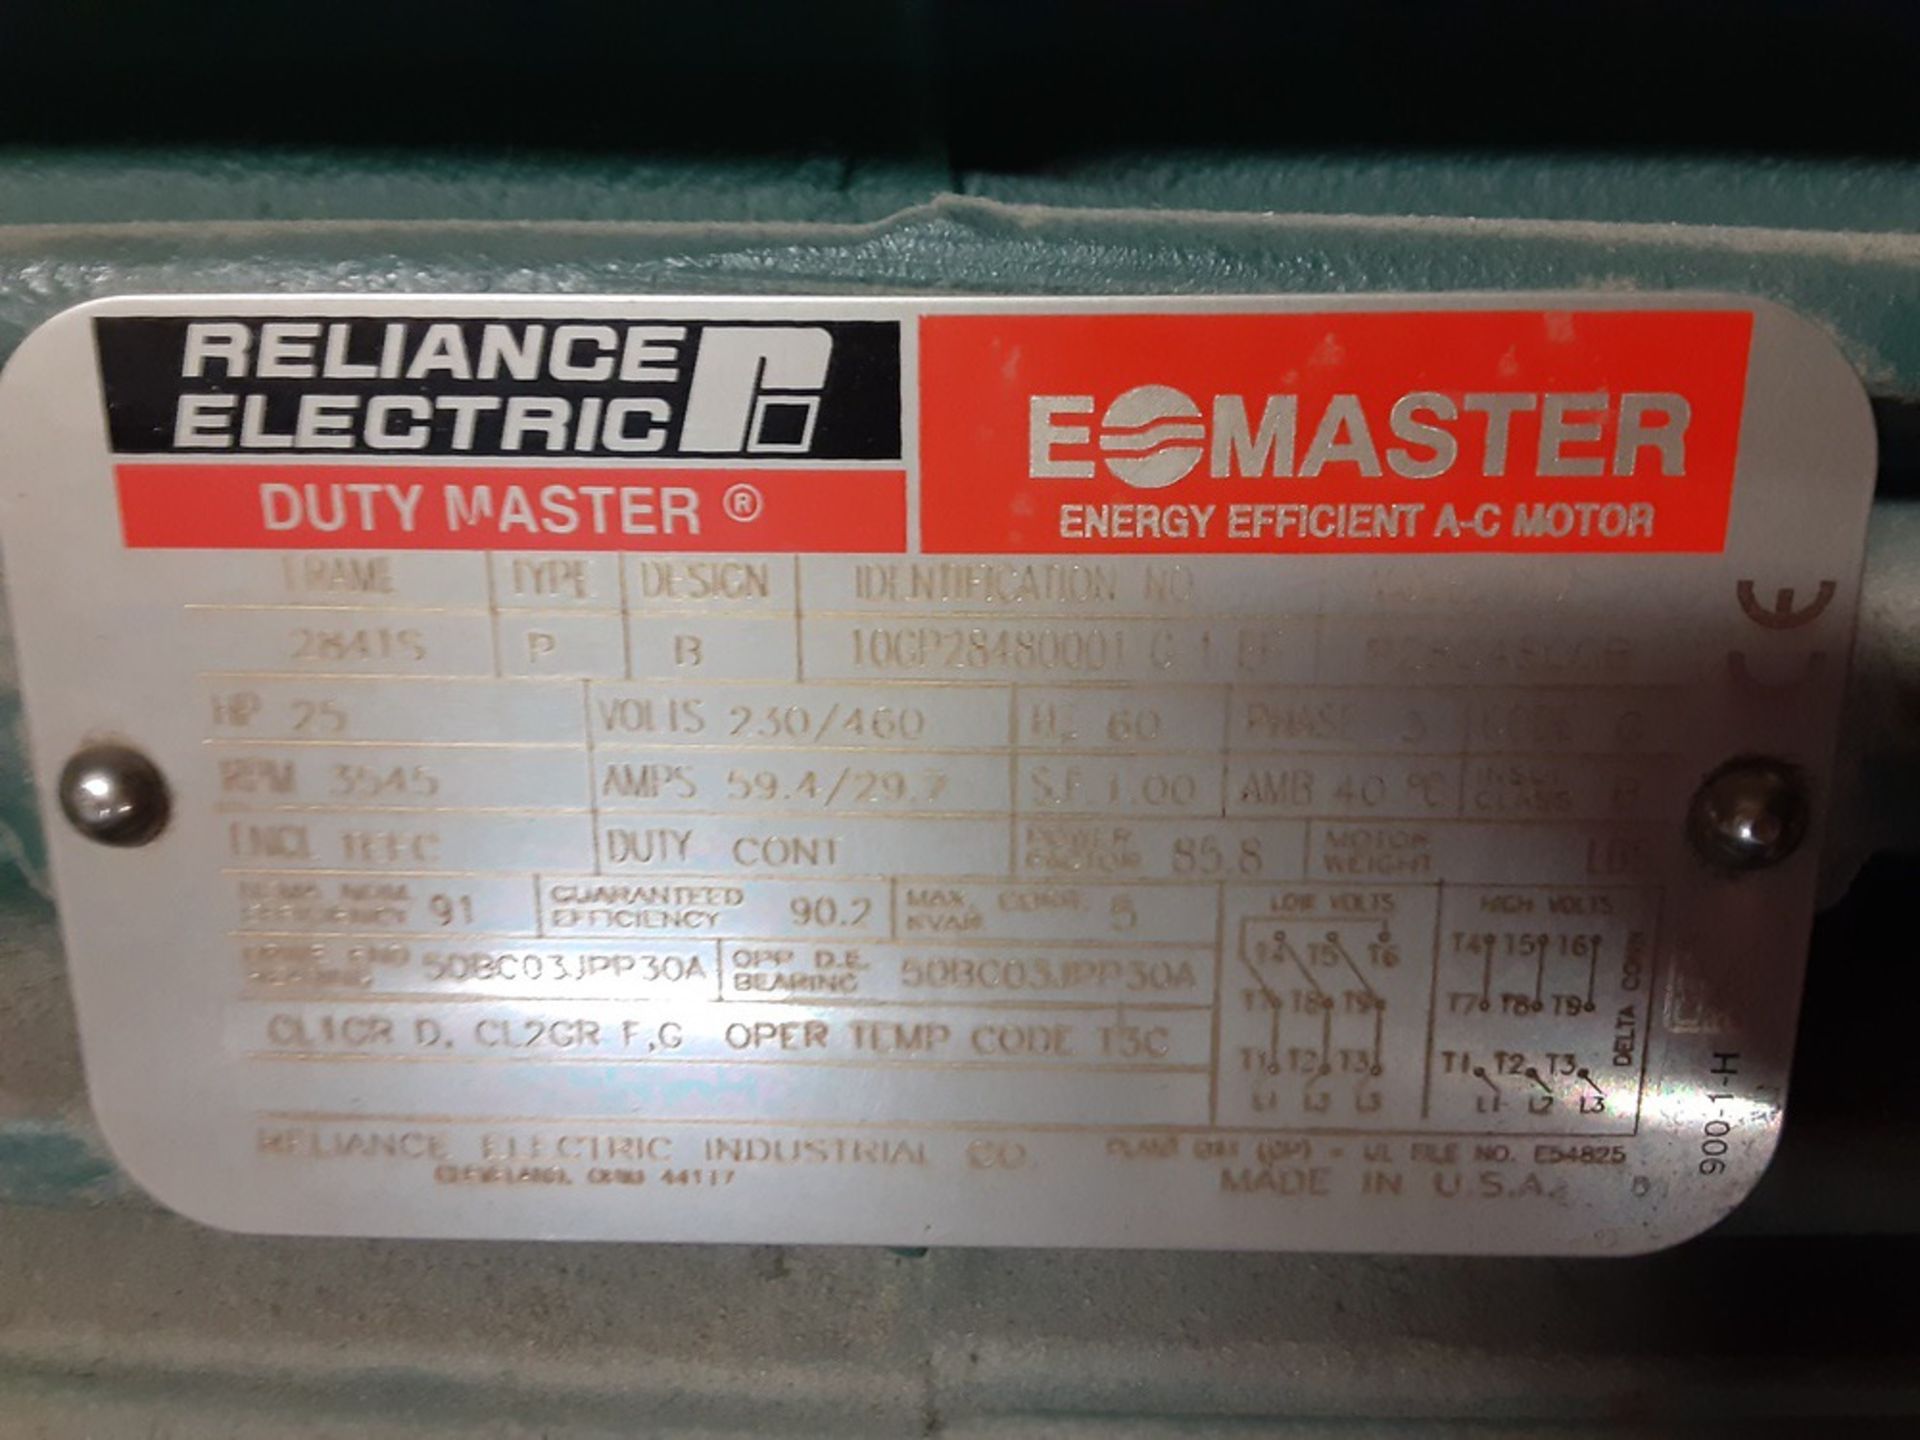 Reliance Electric Motor, 25 HP - Subject to Bulk Bid Lot 845B -The Greater of | Rig Fee: No Charge - Image 2 of 2